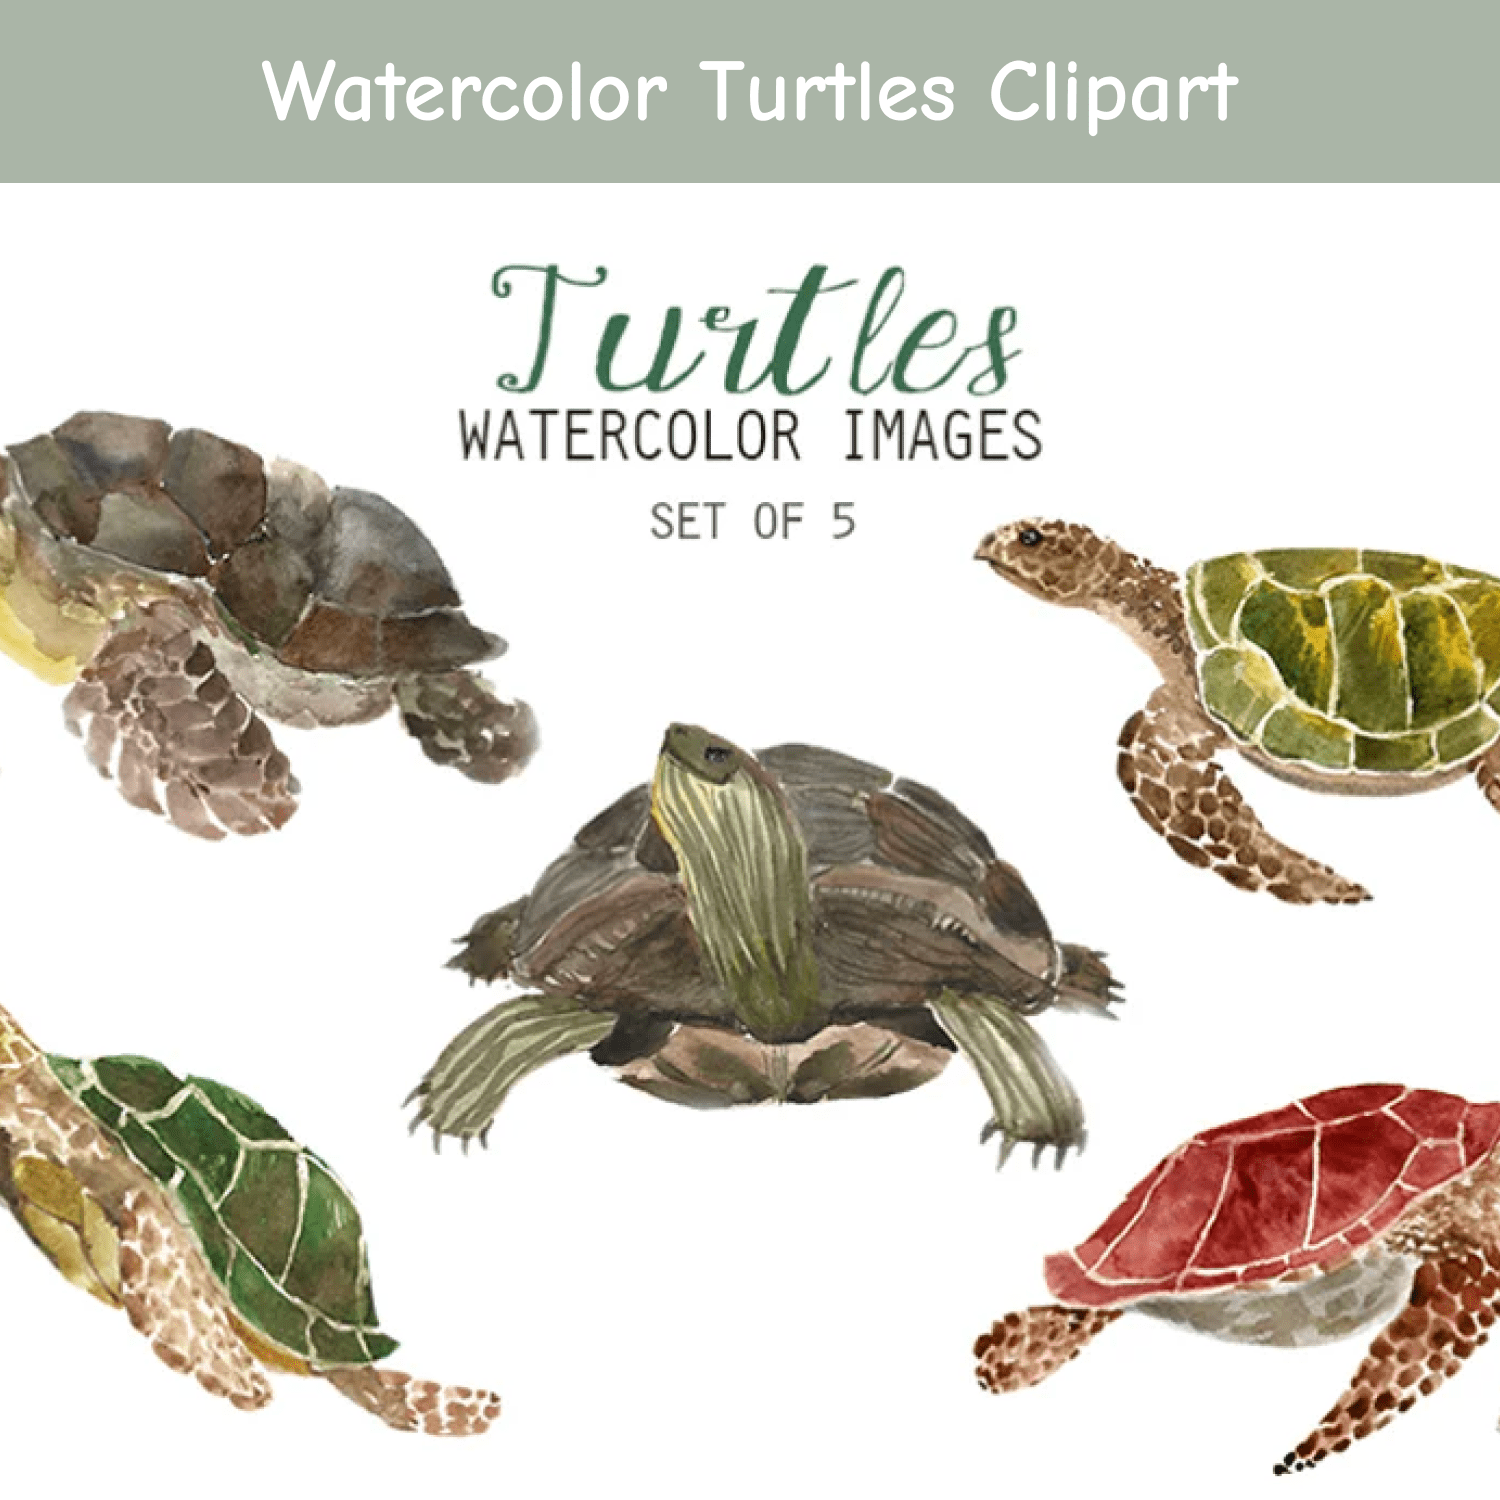 Watercolor Turtles Clipart.